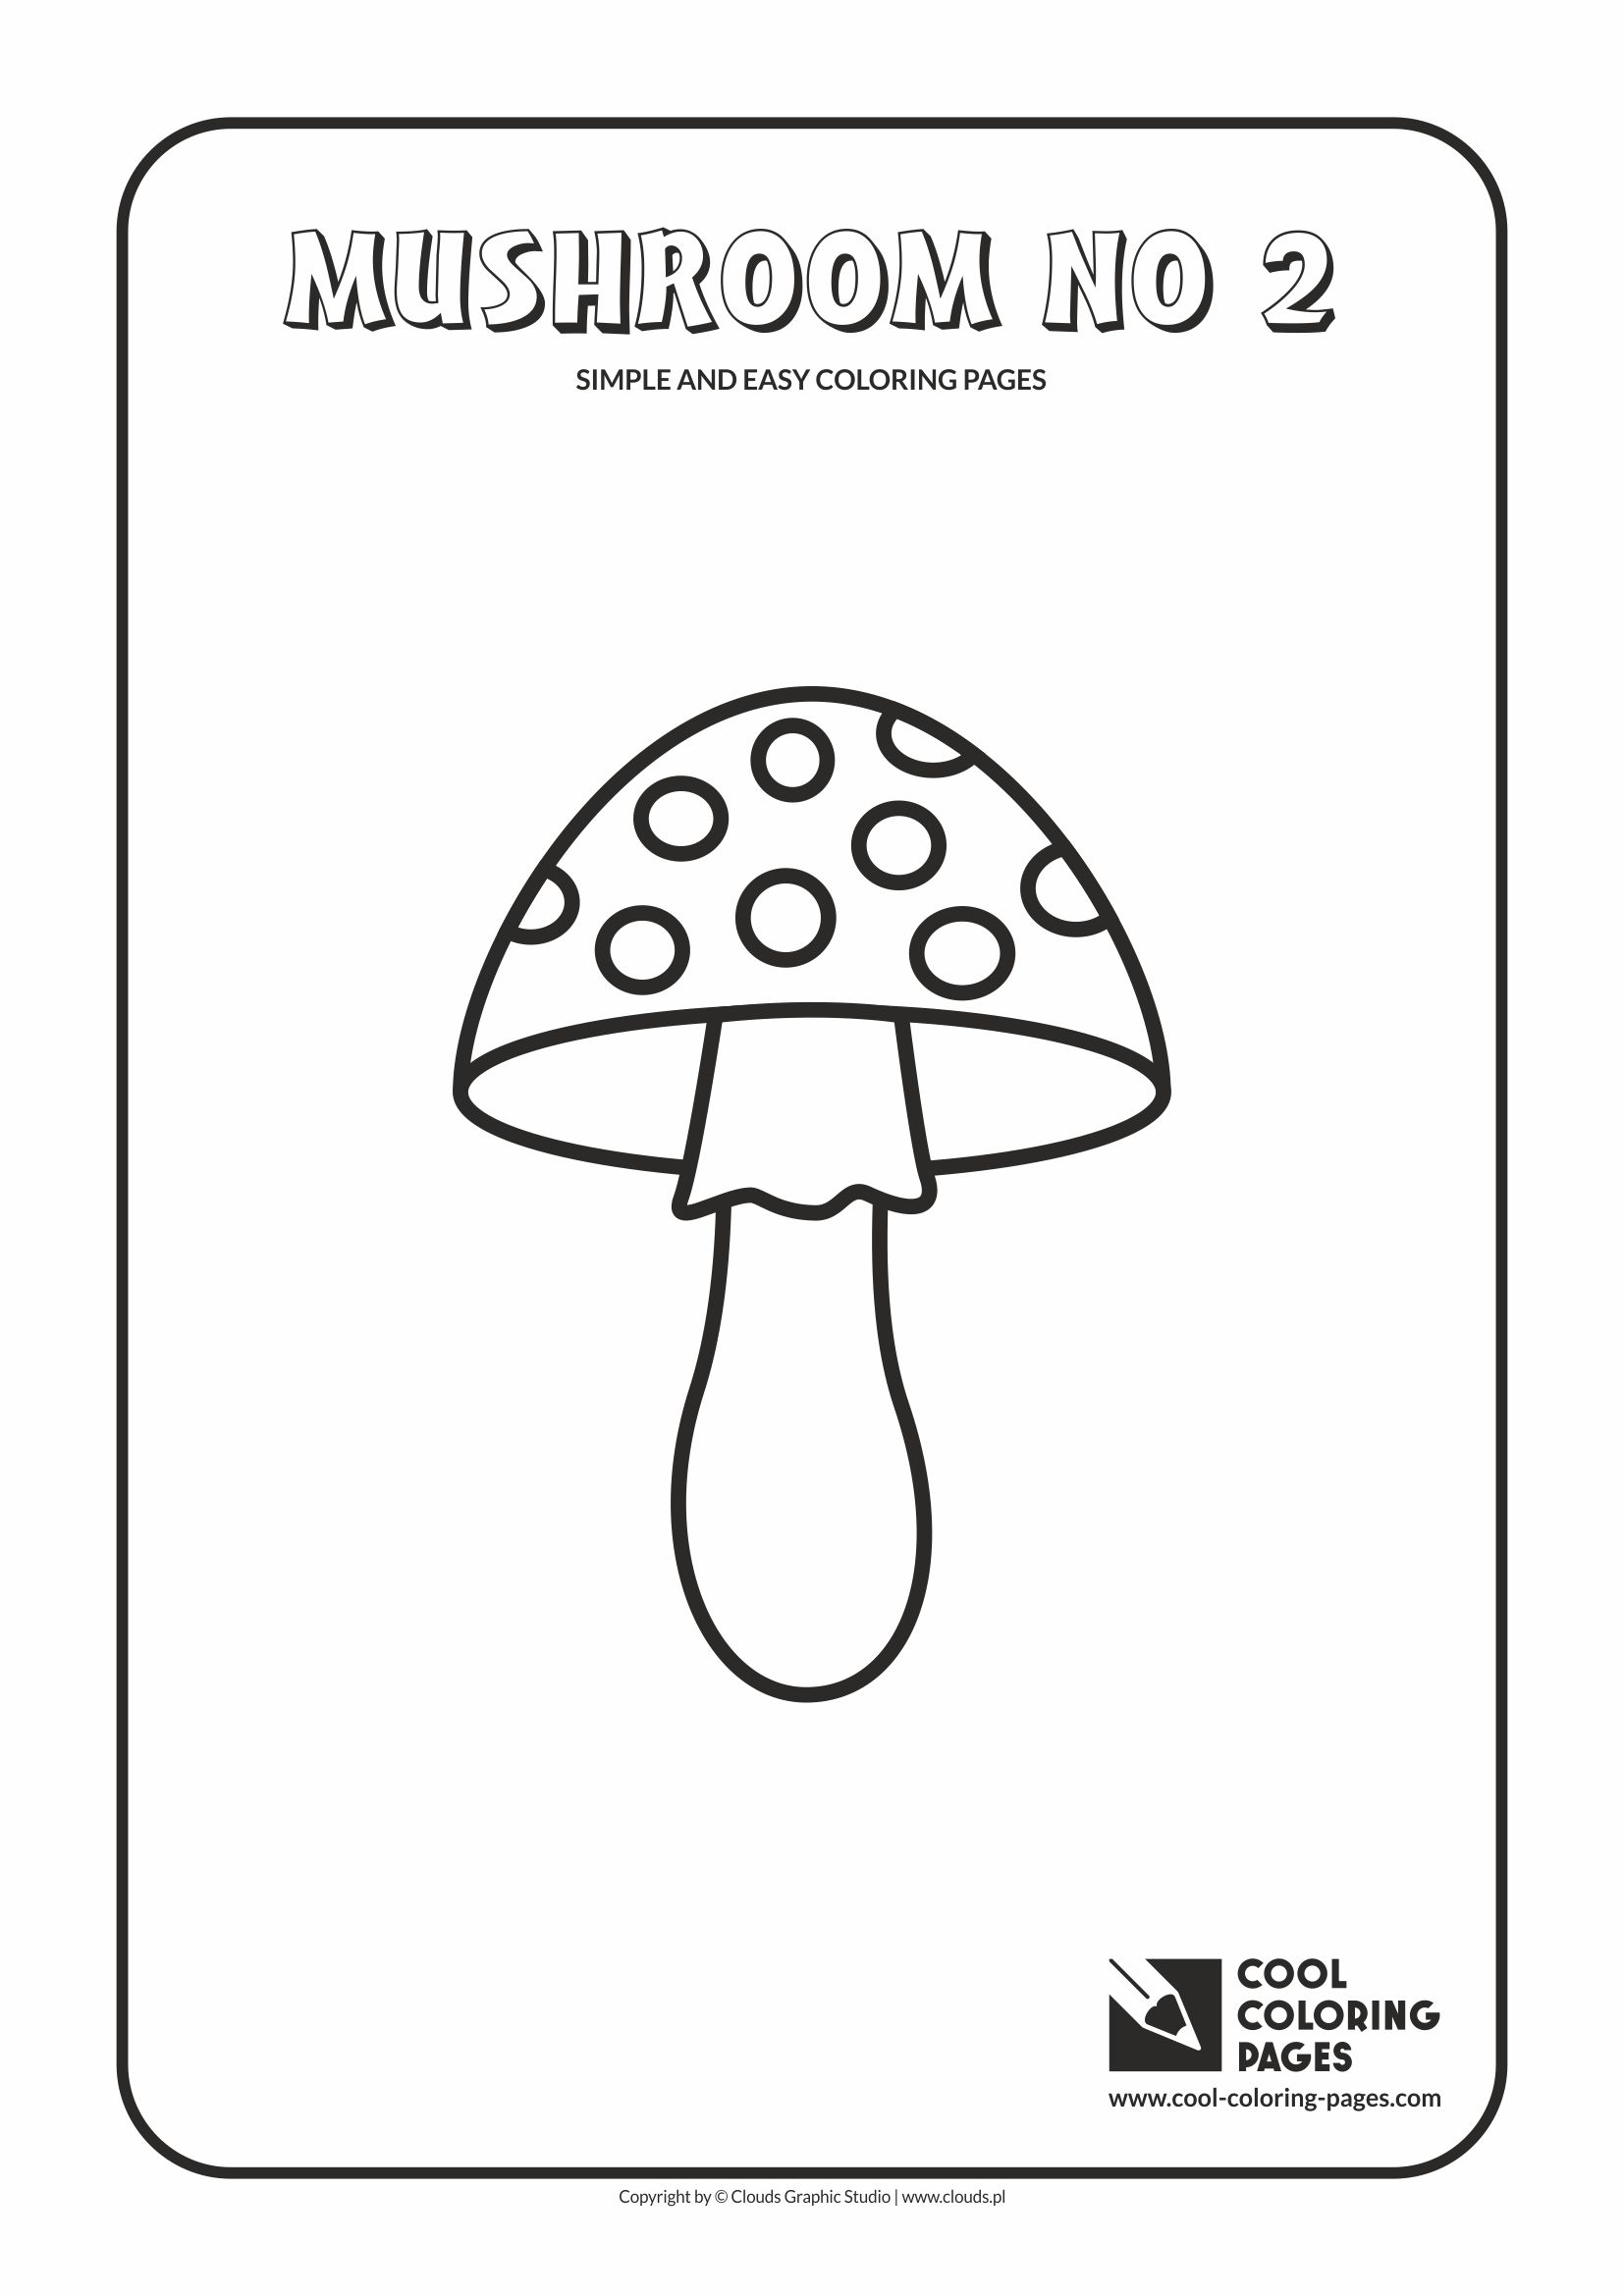 Simple and easy coloring pages for toddlers - Mushroom no 2